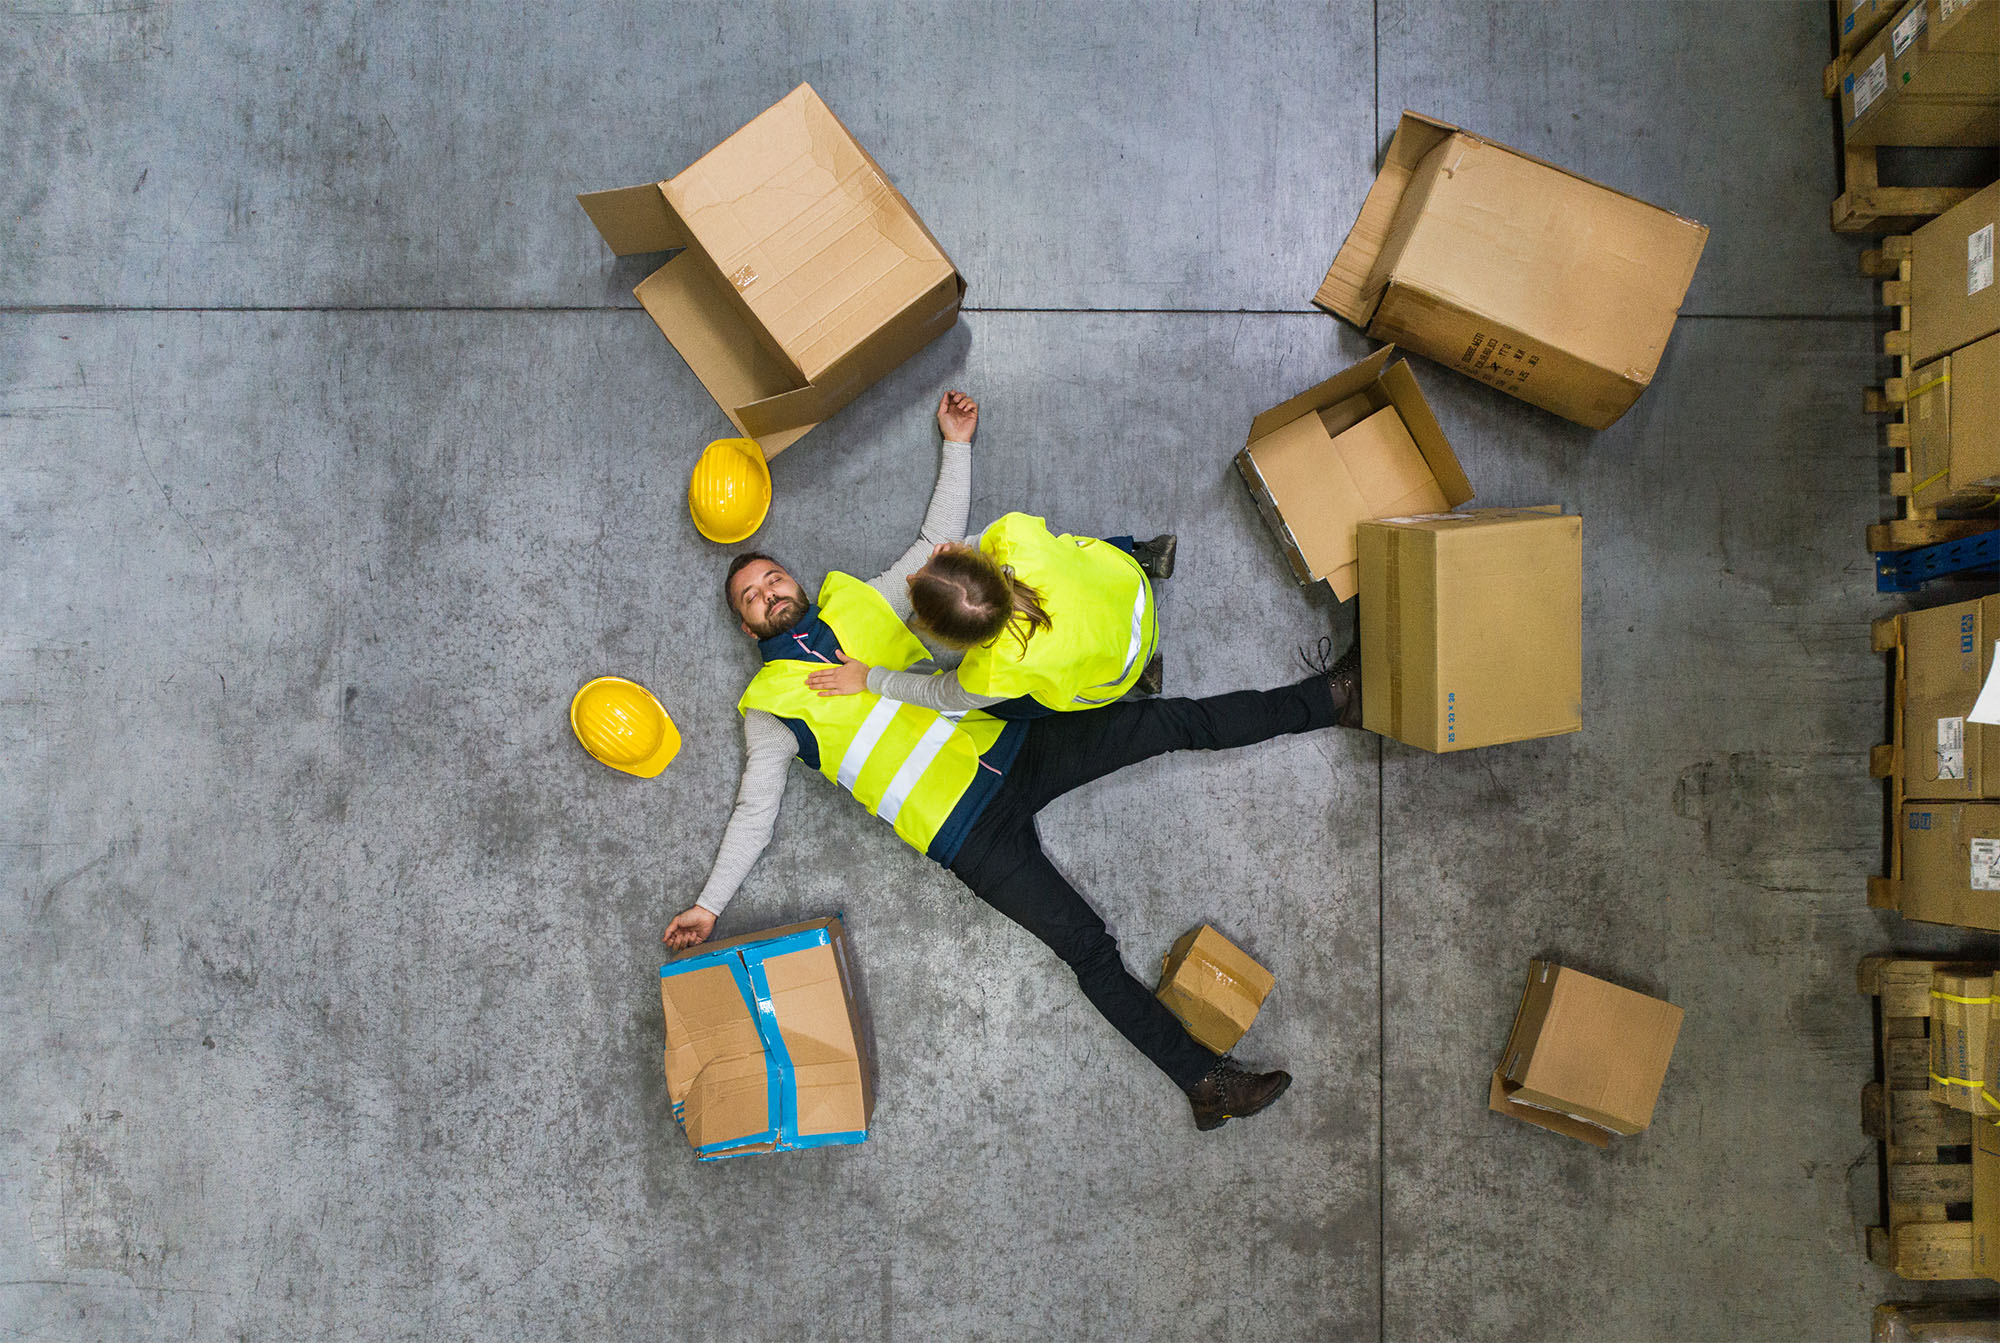 slip, trip, fall at the workplace - personal injury compensation